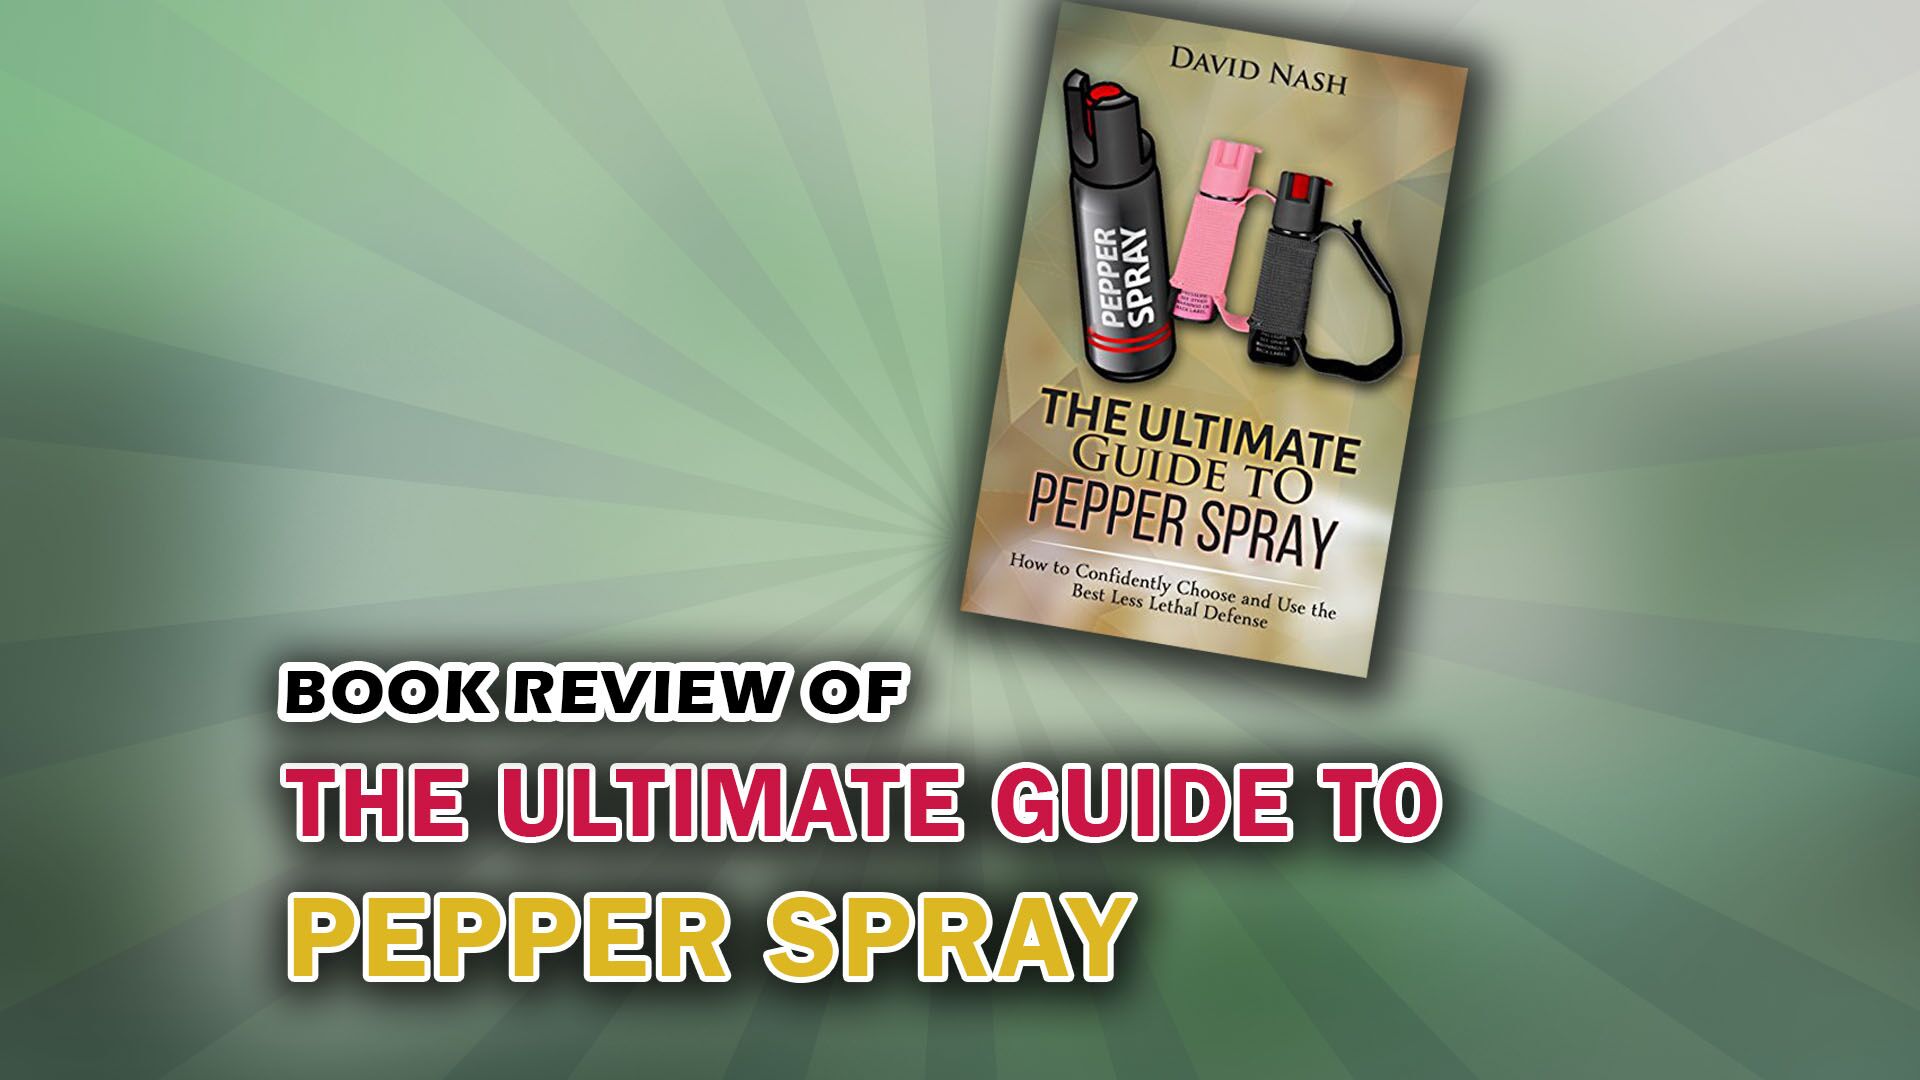 The Ultimate Guide to Pepper Spray Book Review